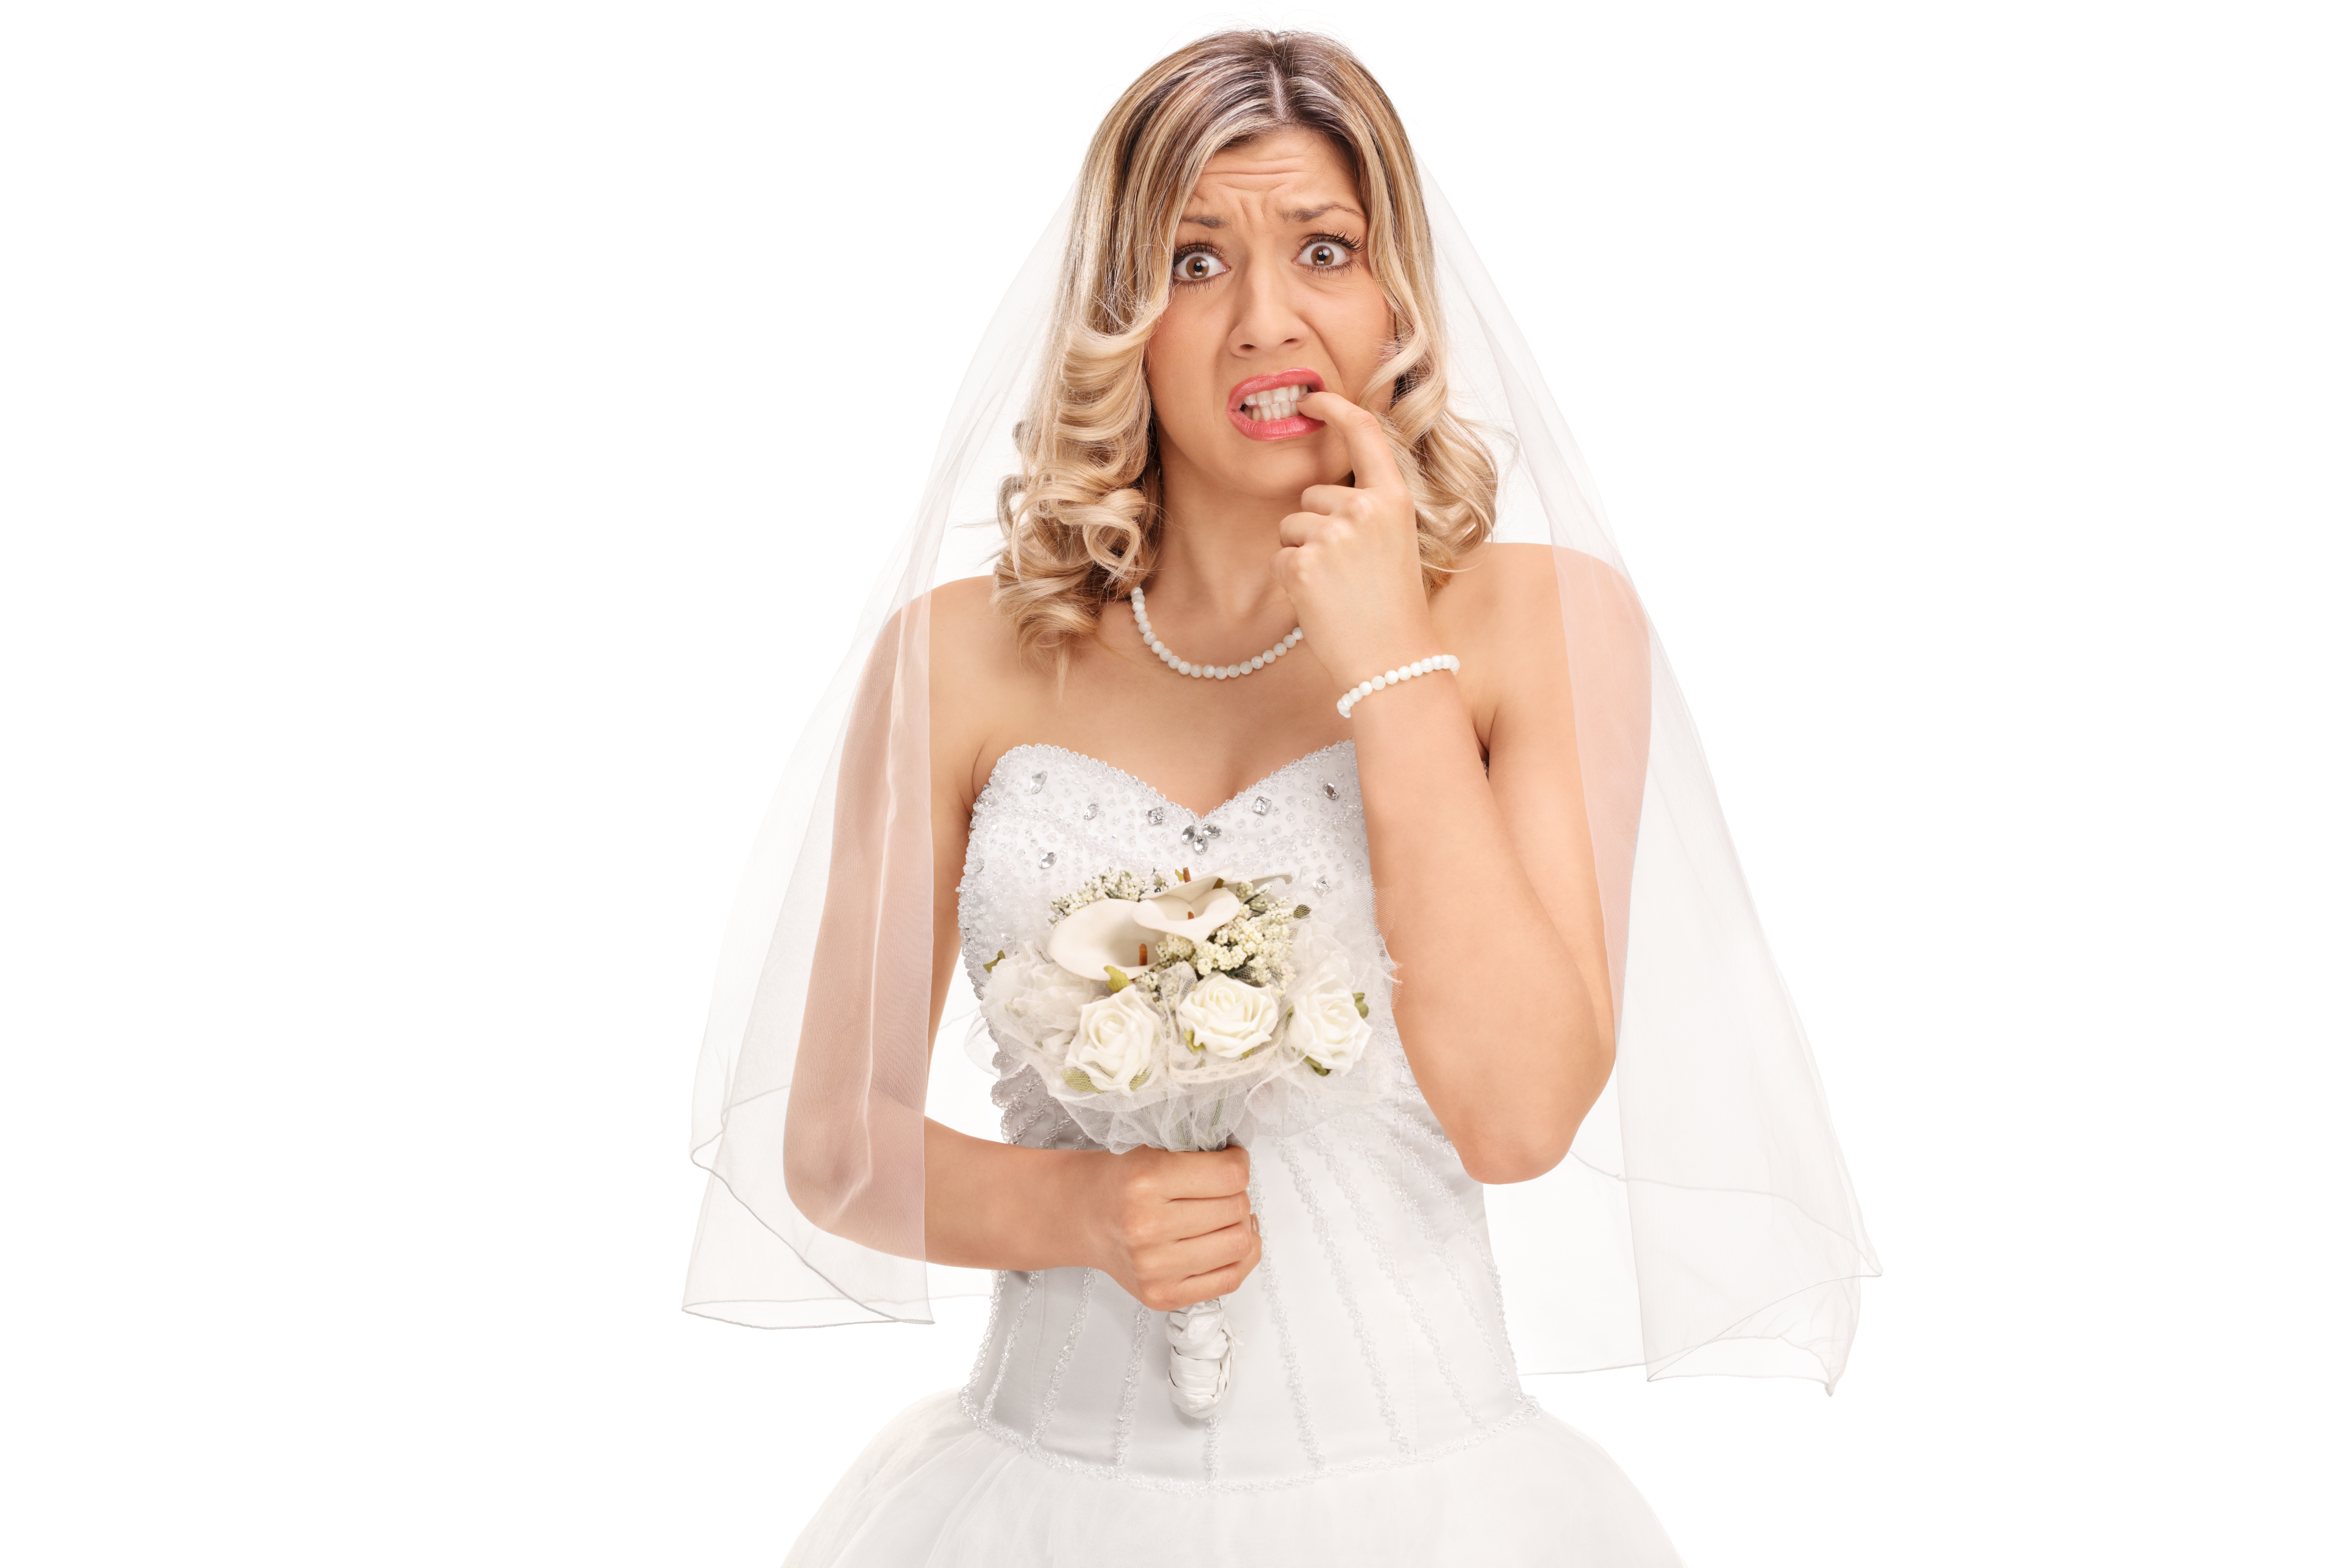 A nervous young bride biting her nails | Source: Shutterstock